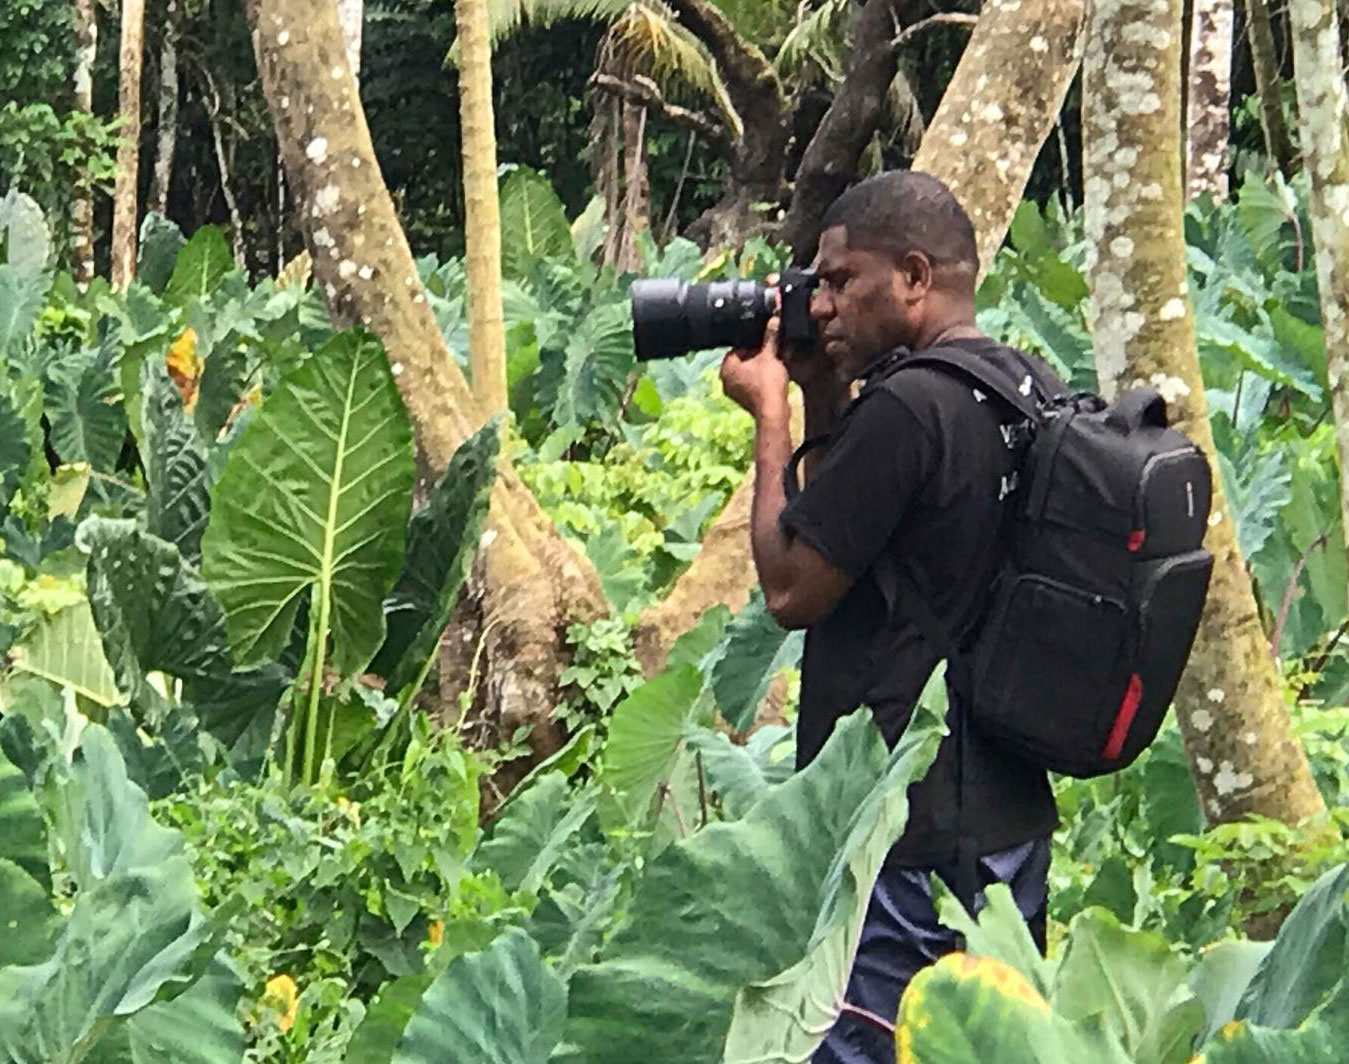 Man taking a photo in thick green vegetation